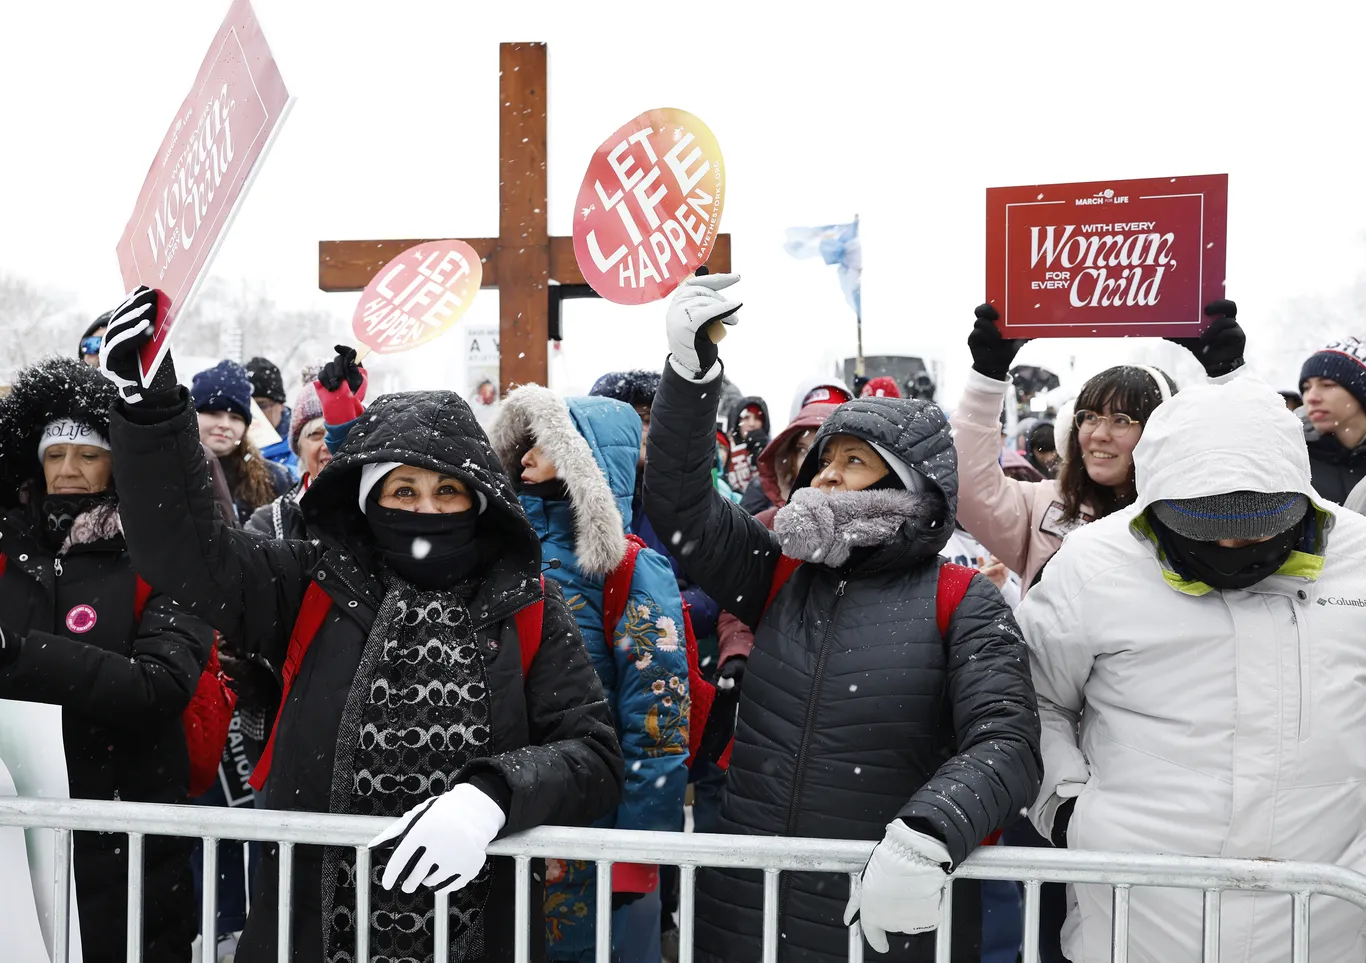 Amidst Snowfall in Washington, D.C., March for Life Protests Abortion